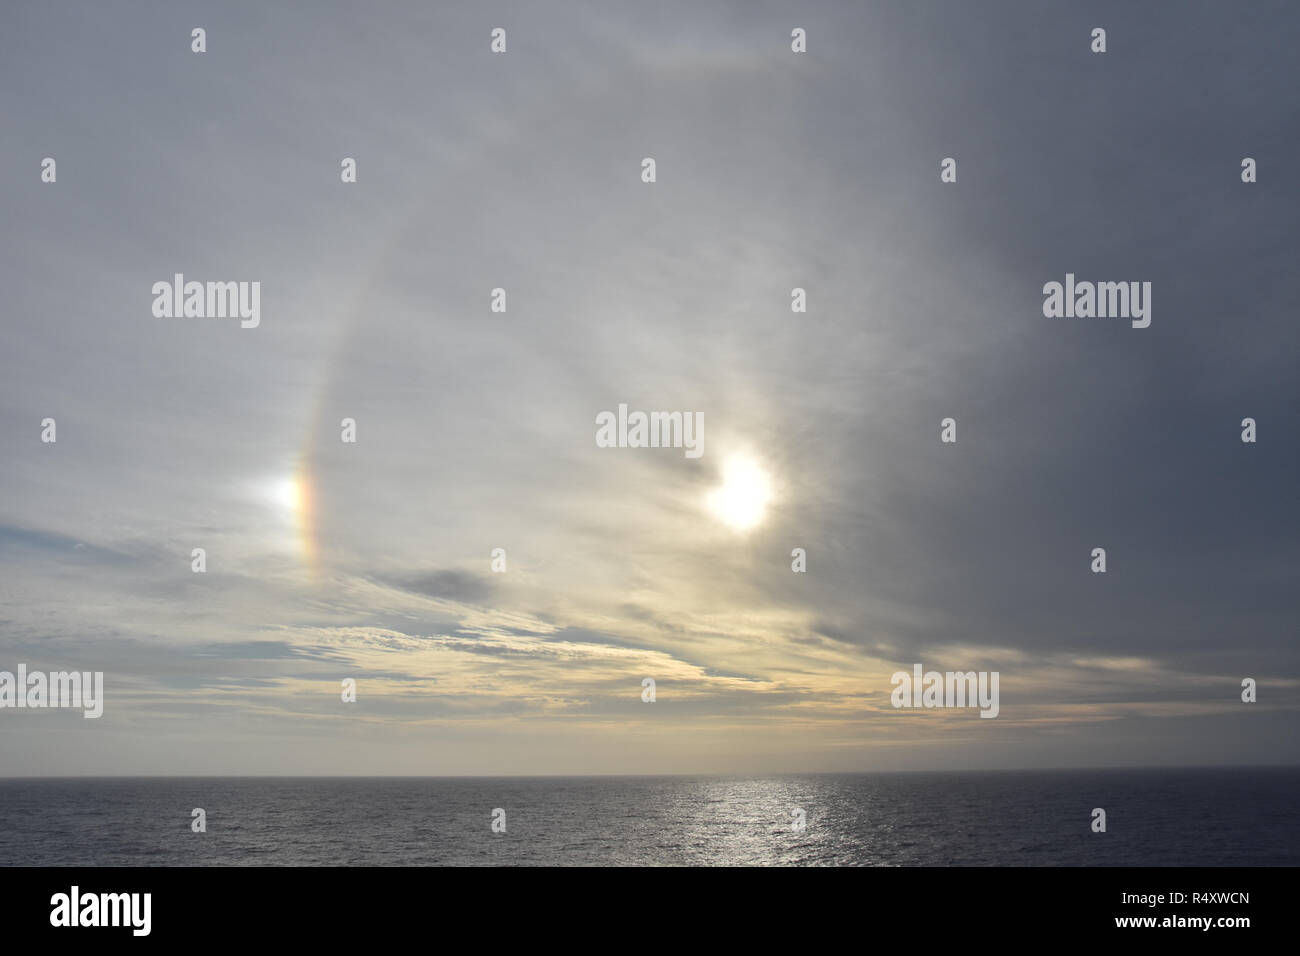 Sun Dog, or parhelion, as seen from the deck of a ship in the Pacific Ocean near Easter Island. Stock Photo